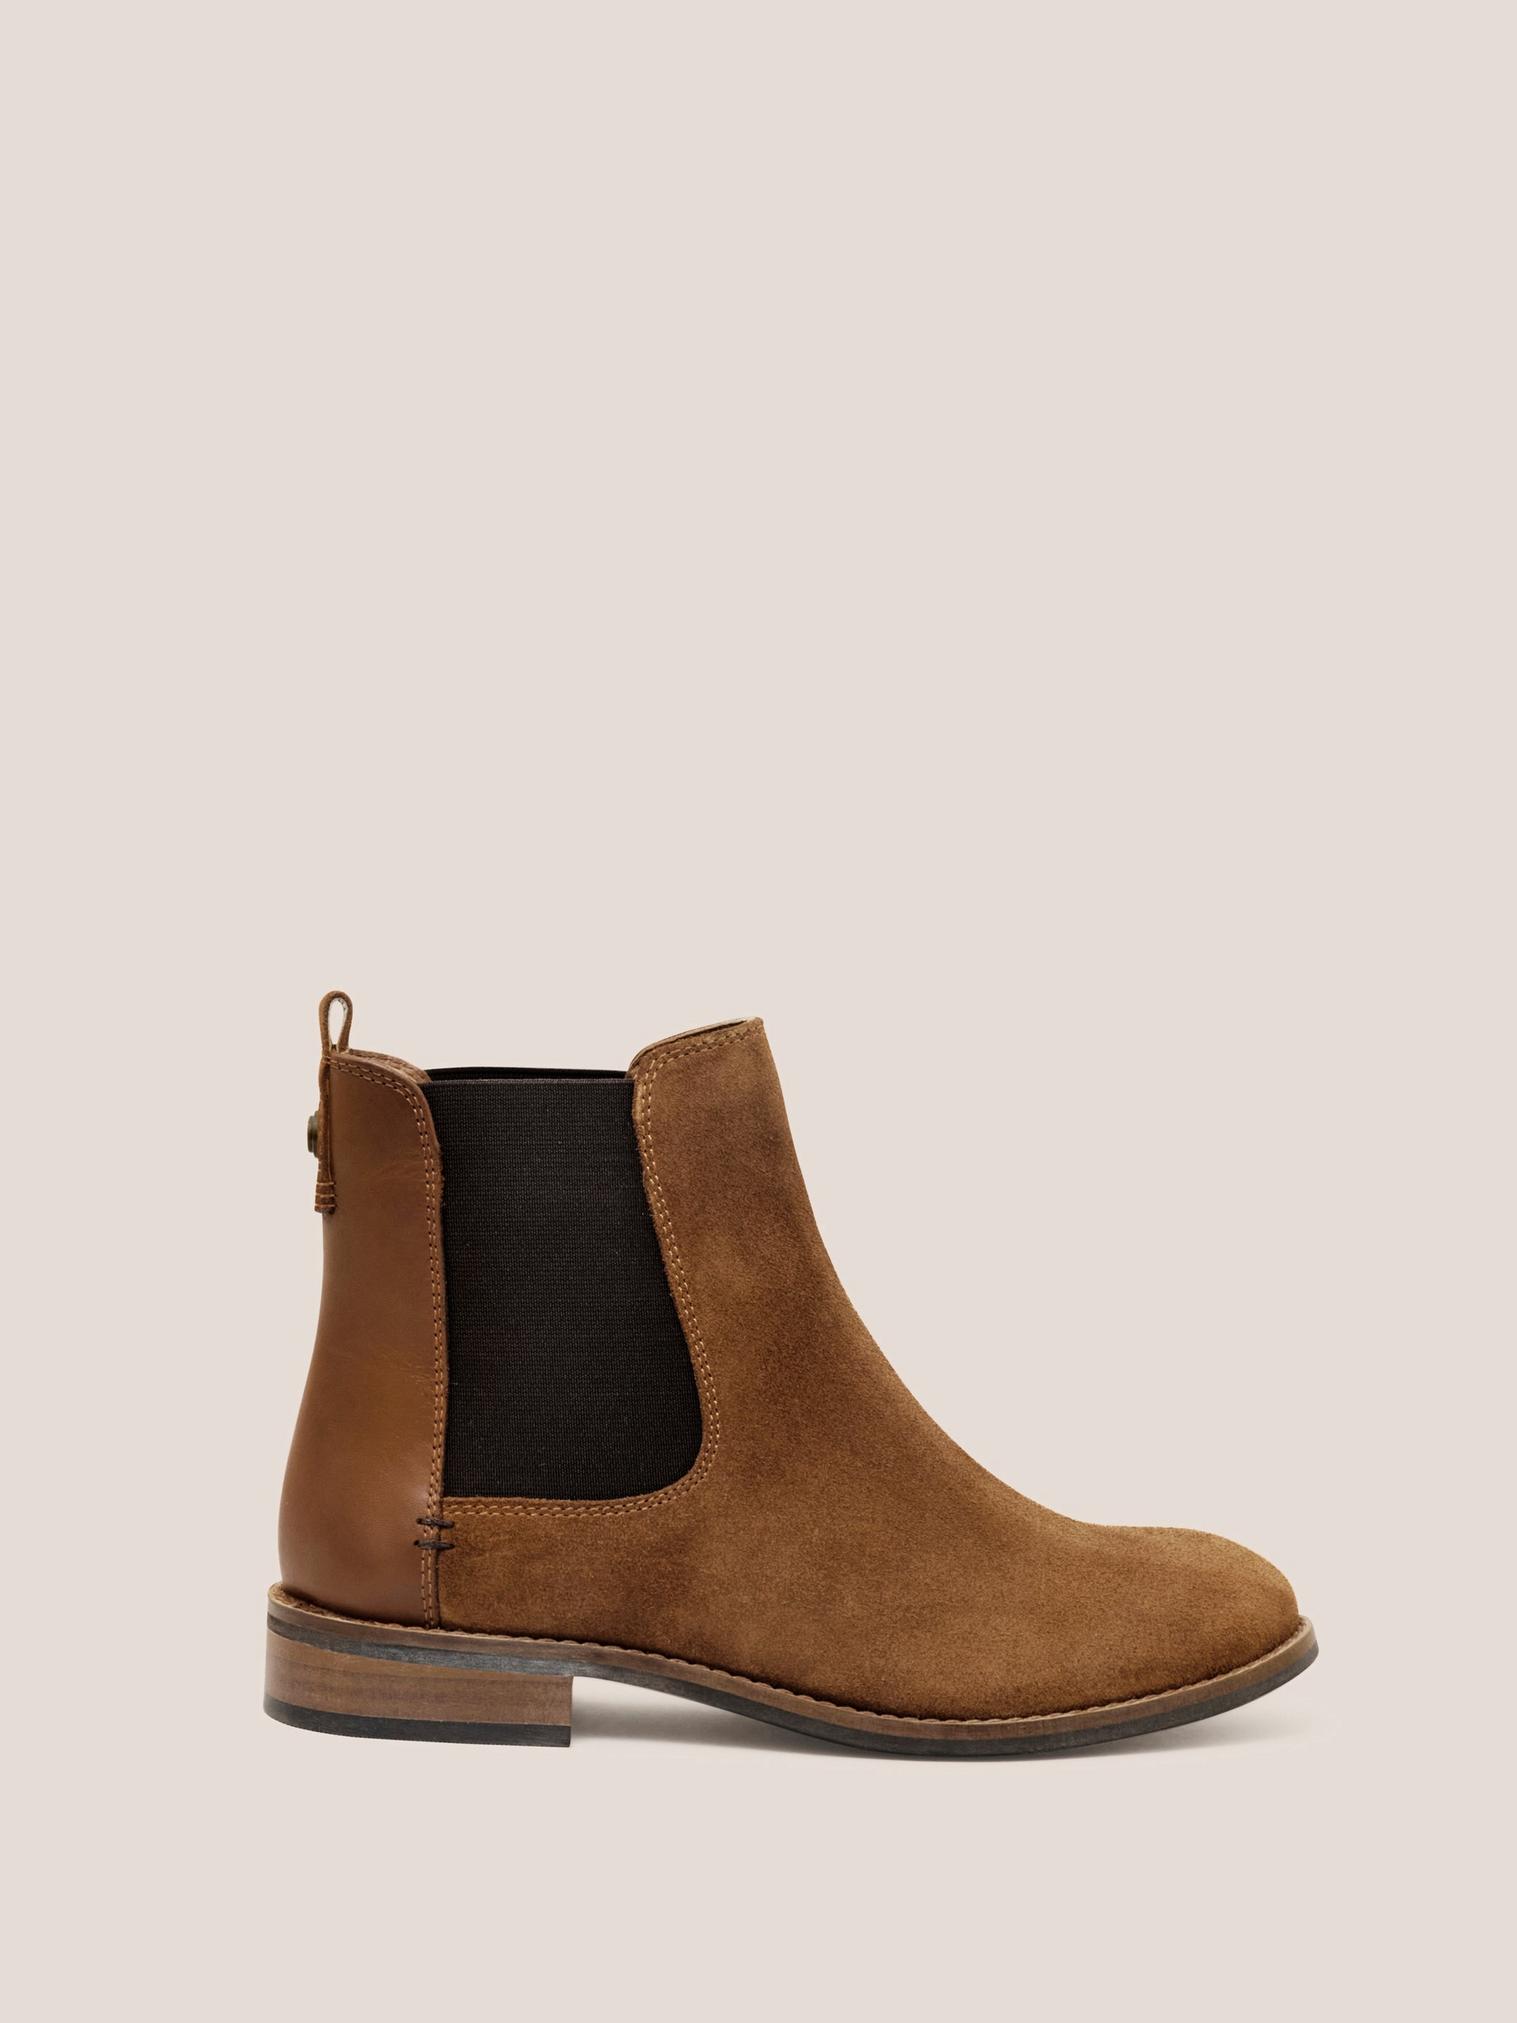 Frankie Suede Chelsea Boot in MID TAN - MODEL FRONT